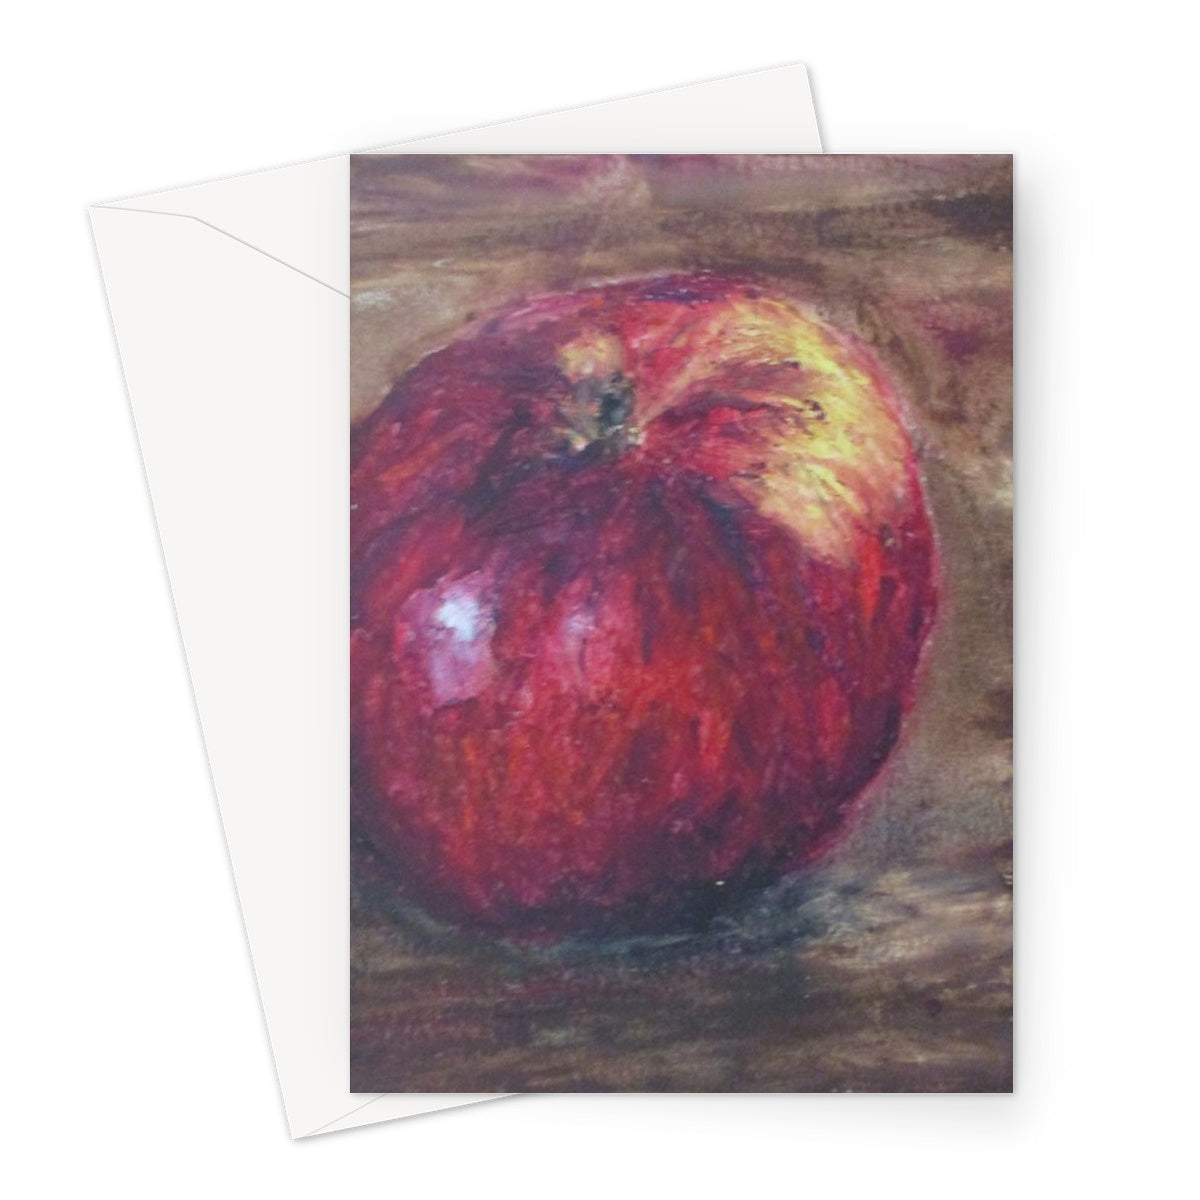 Apple A ~ Greeting Card